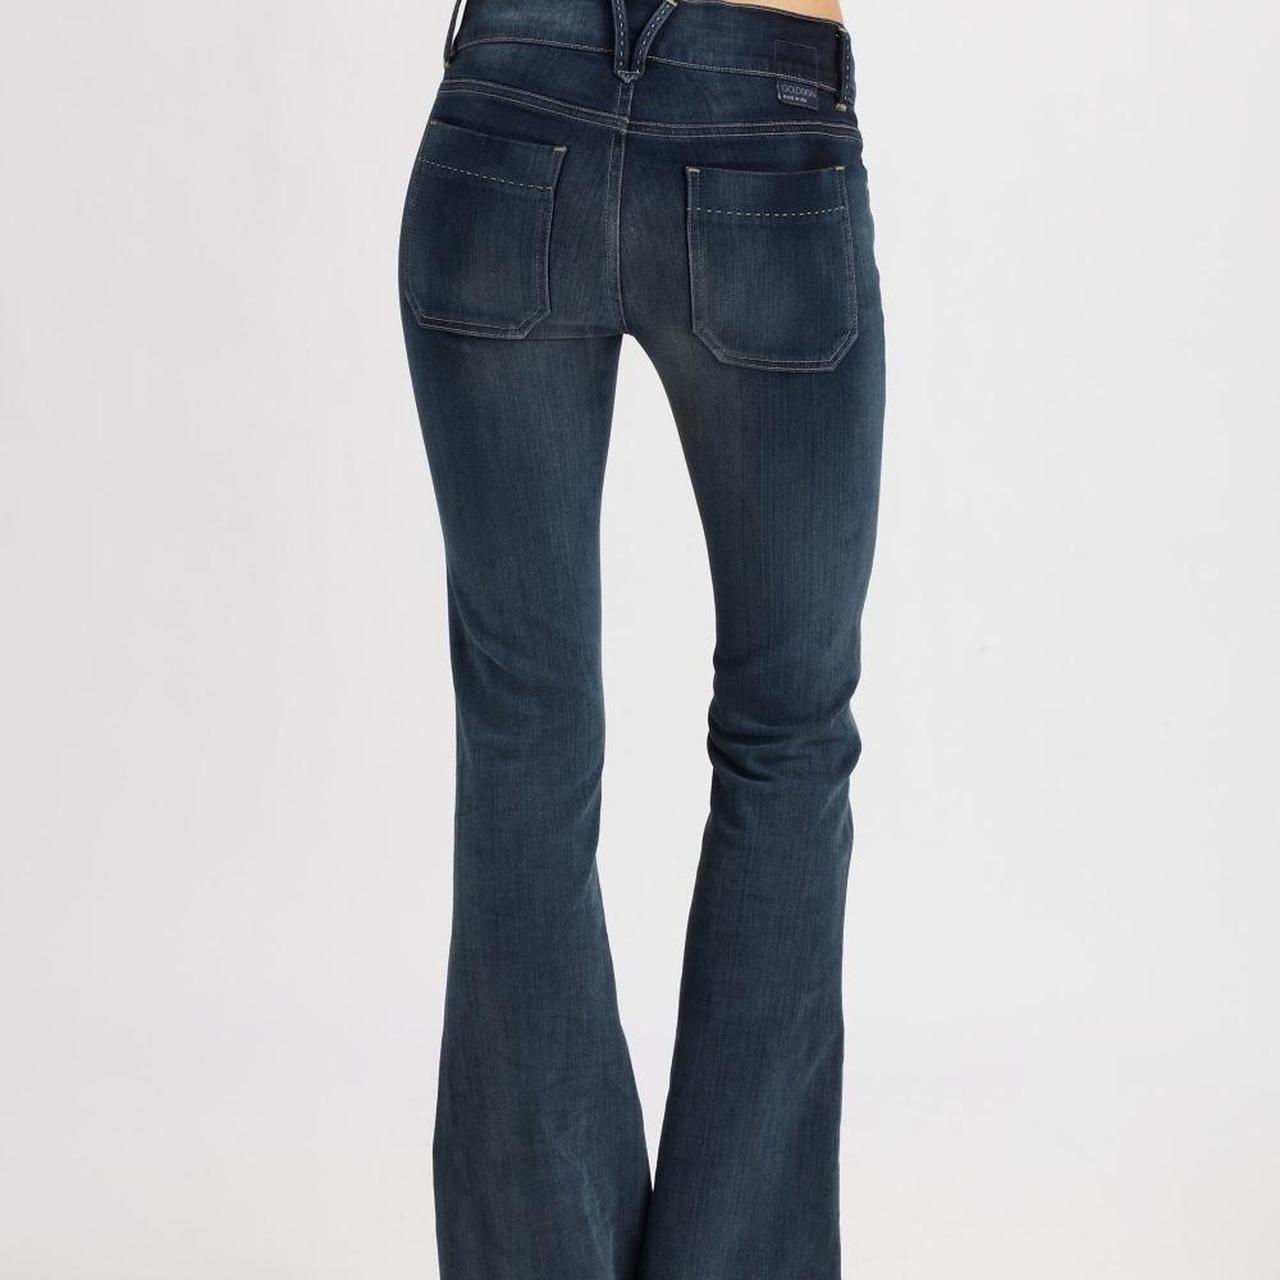 Product Image 1 - GOLDSIGN SISSI FLARE JEANS
• rare